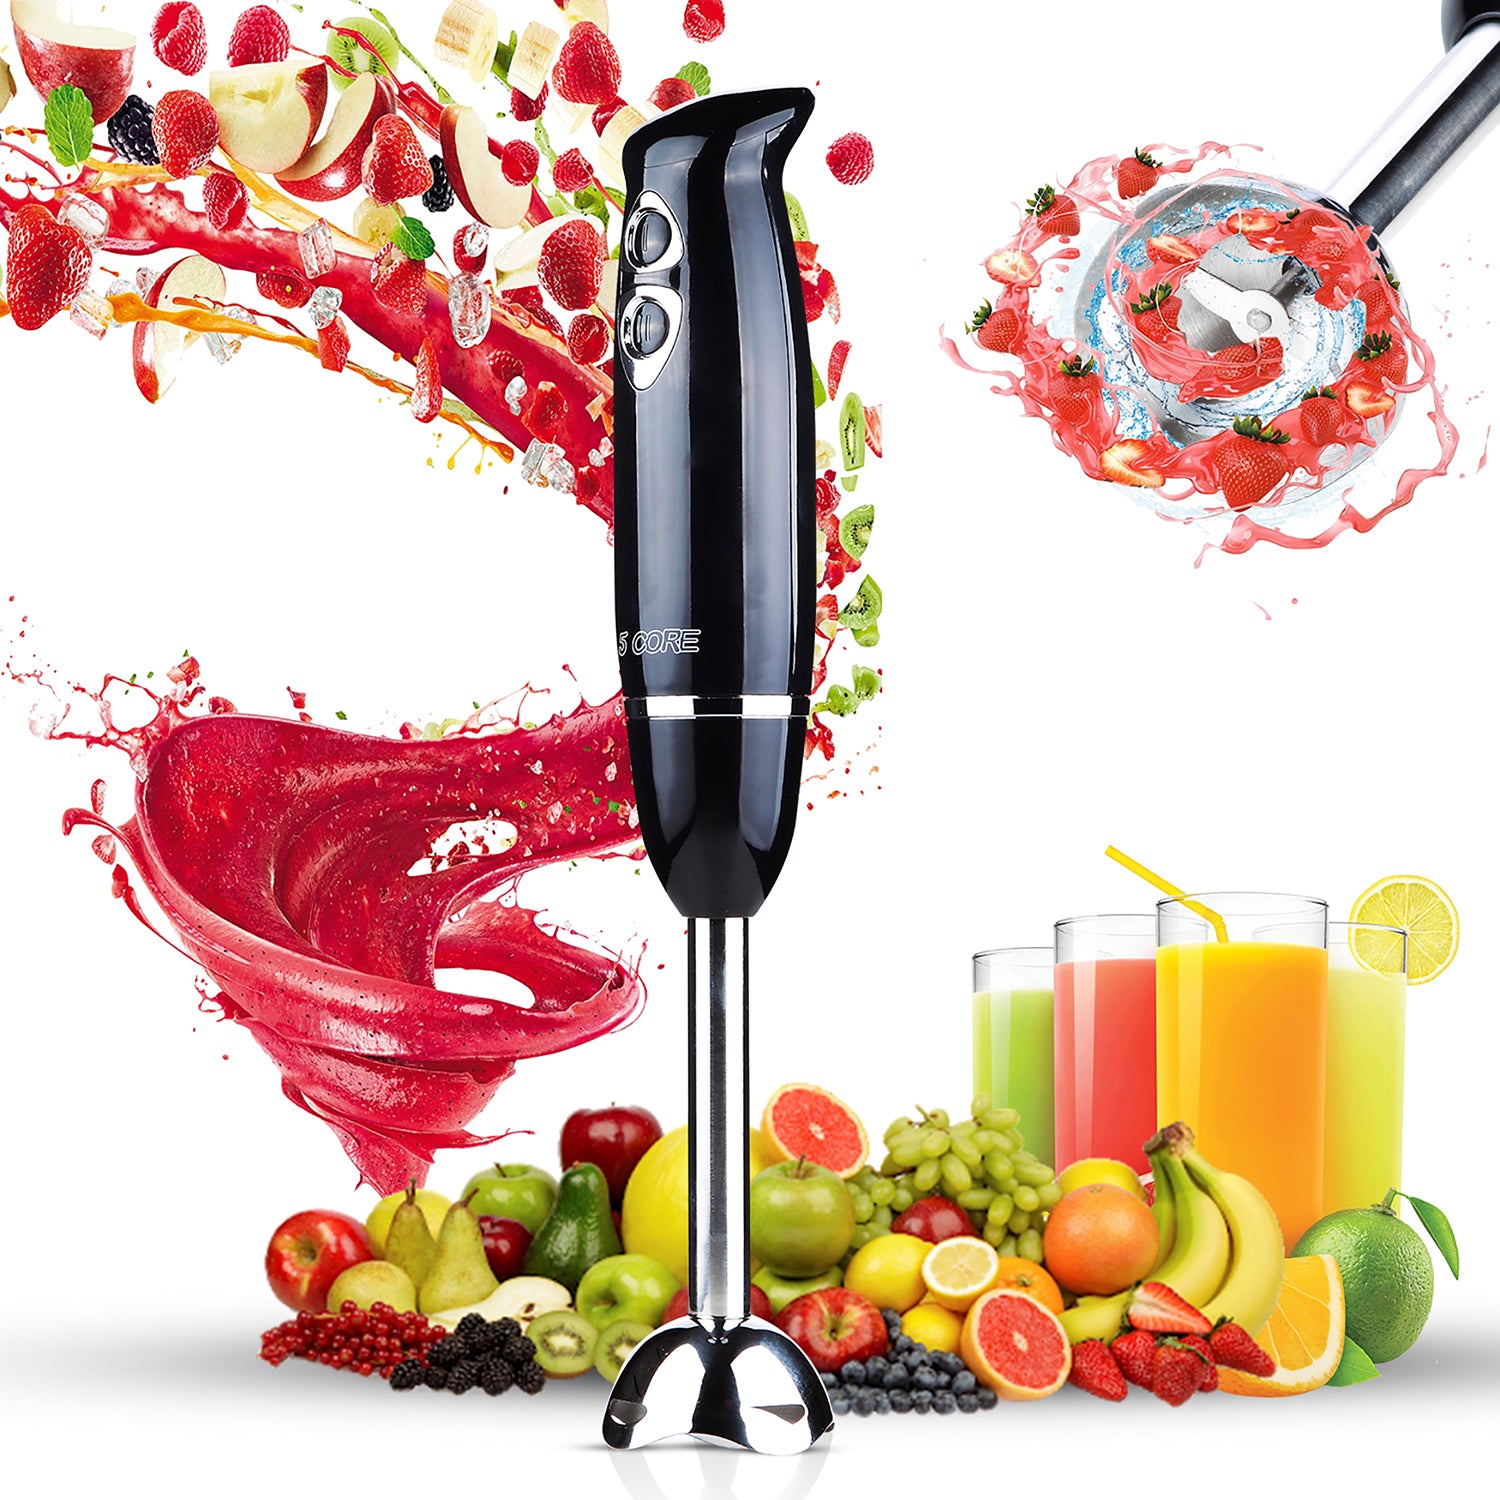 5Core Immersion Hand Blender 500W Electric Handheld Mixer w 2 Mixing Speed for Smoothies Puree